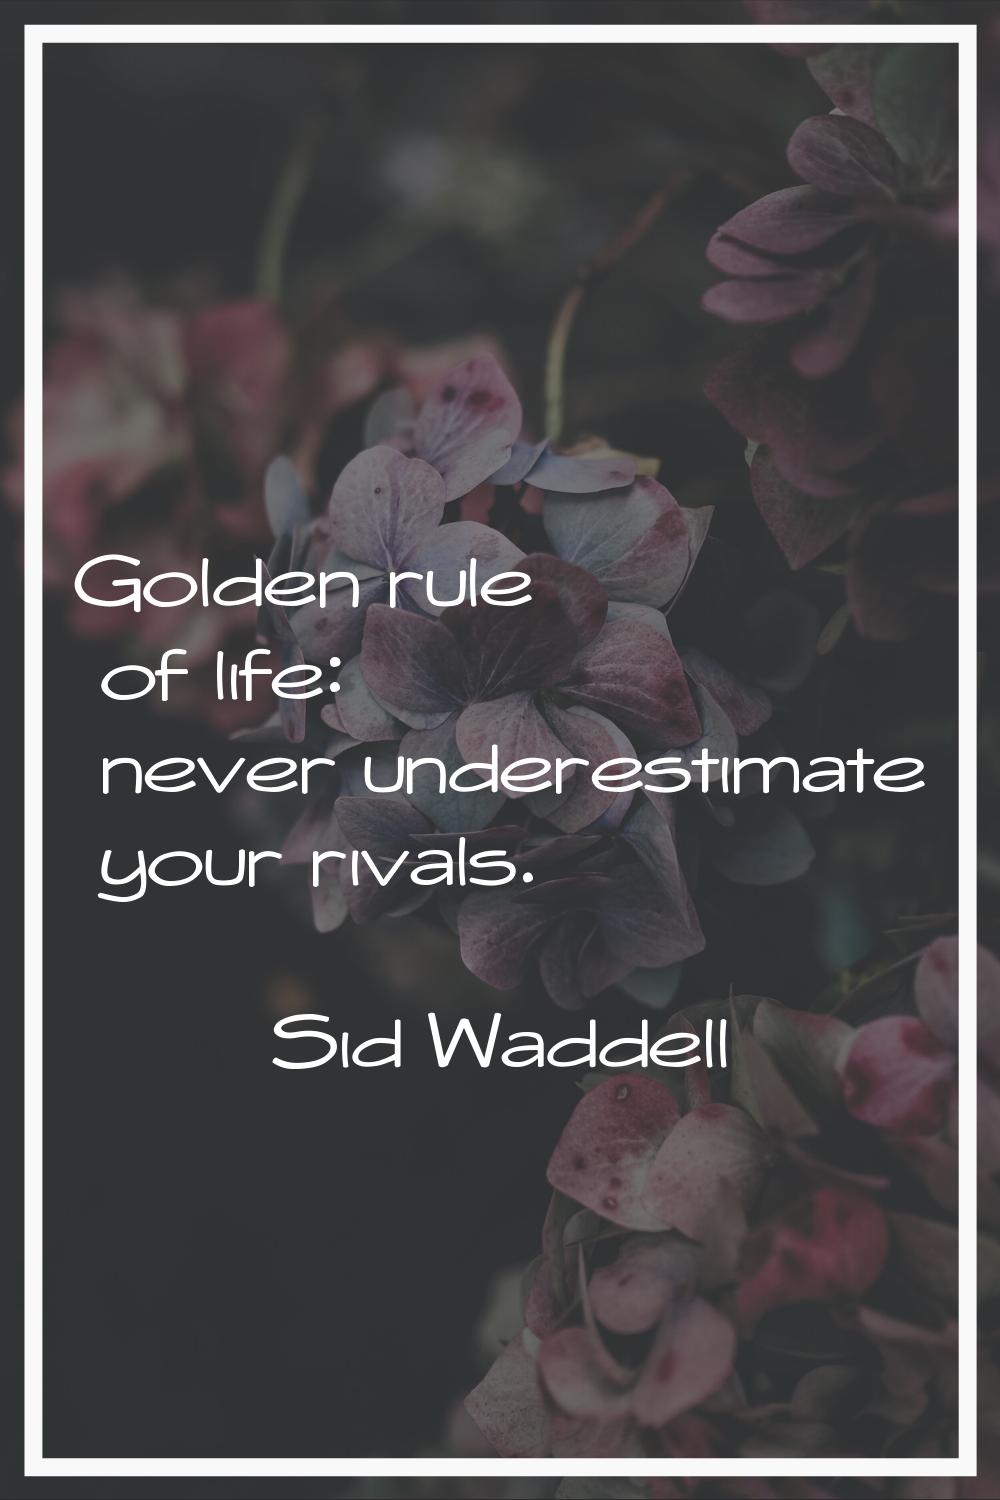 Golden rule of life: never underestimate your rivals.